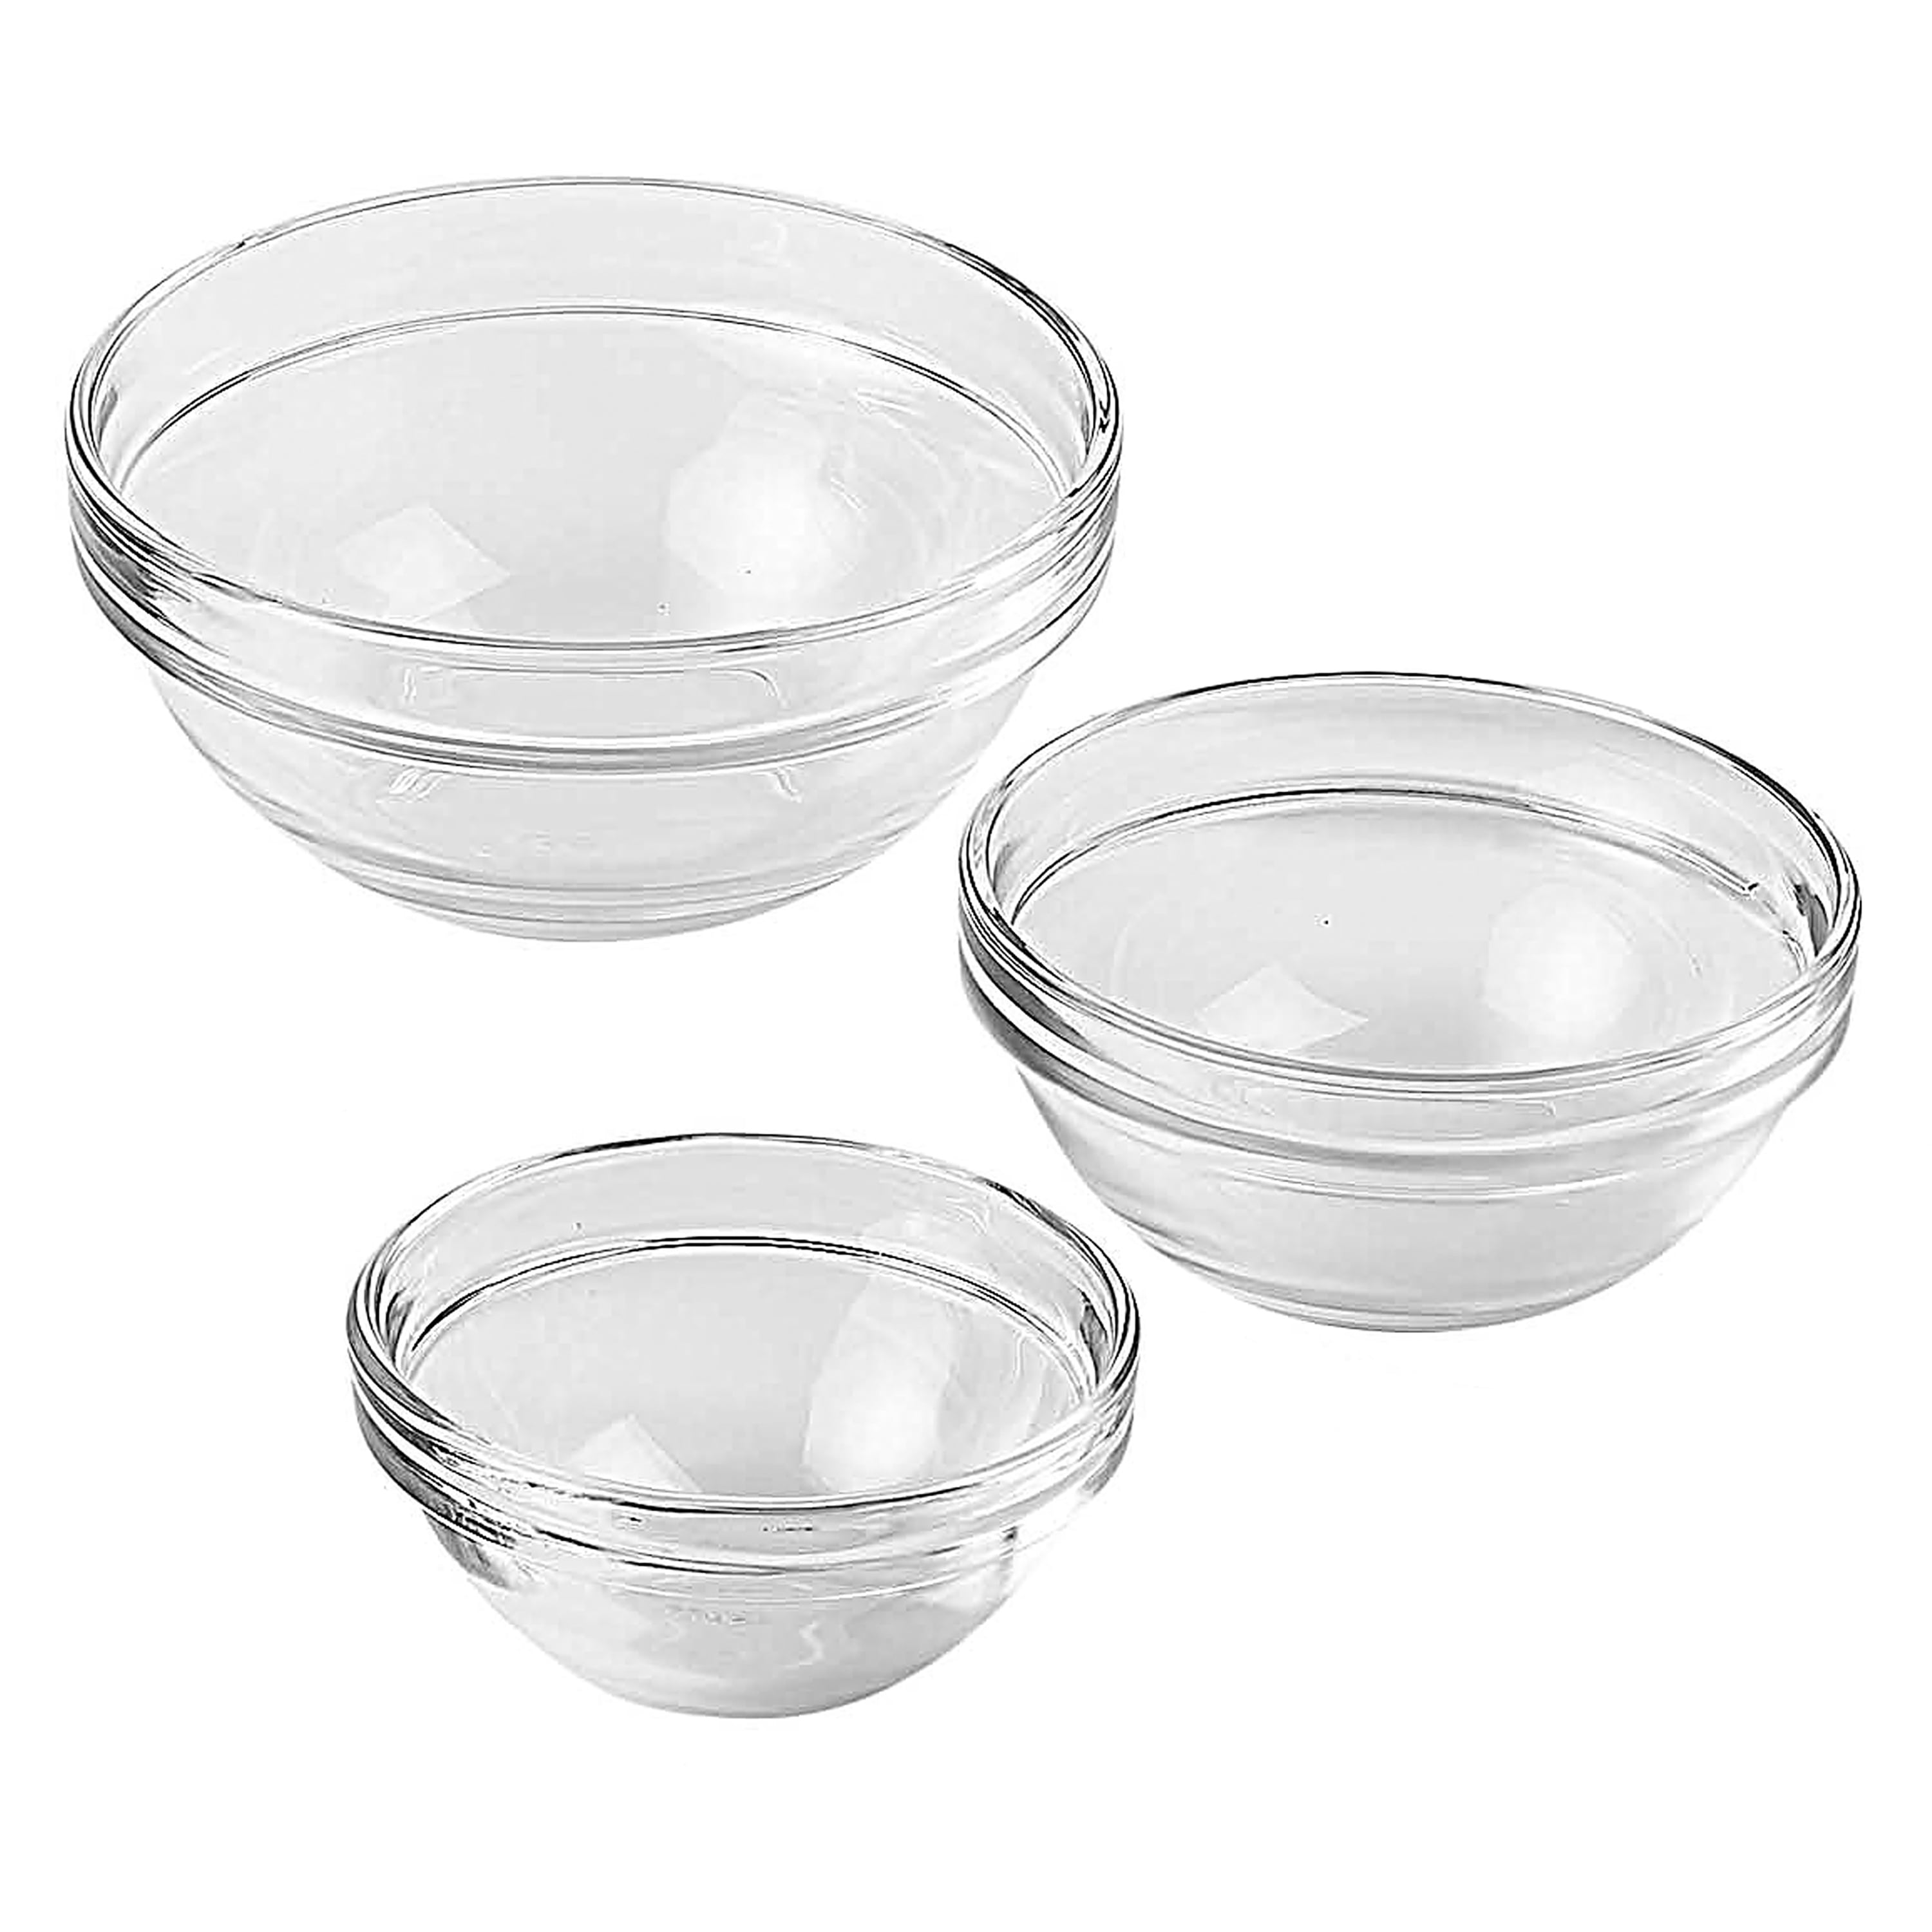  Oggi Set of 3 x Glass Pinch Bowls - 4oz with Clip Lids, Ideal  as Salt and Pepper Bowls, Storage Bowls with Lids, Condiment Bowls, Mini  Bowls, Prep Bowls for Cooking